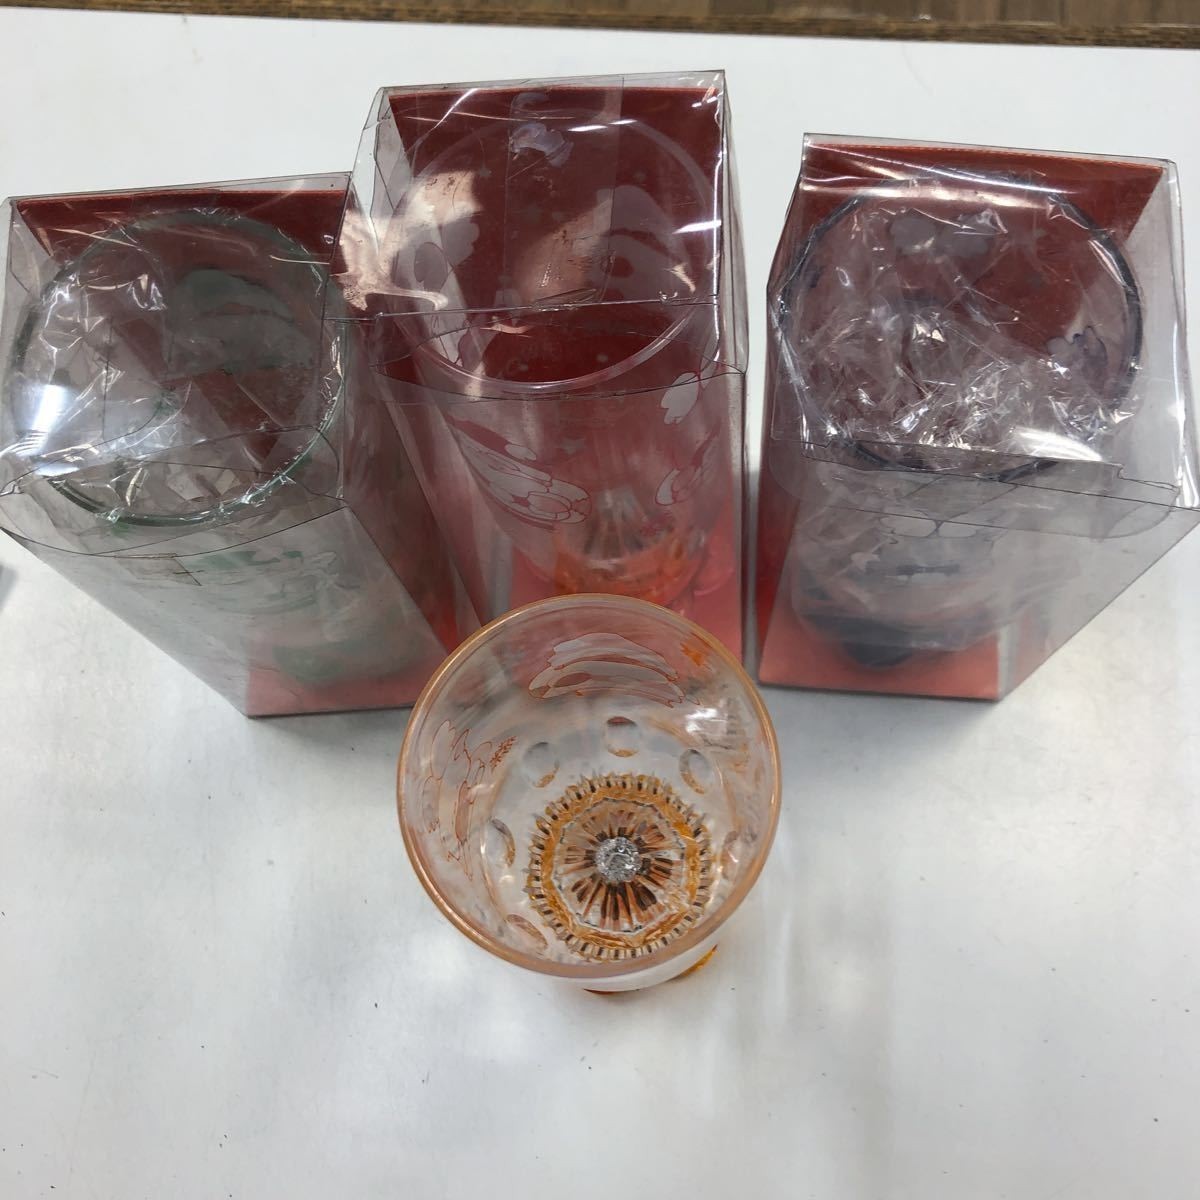  Christmas cup 4 piece collection new goods unused 